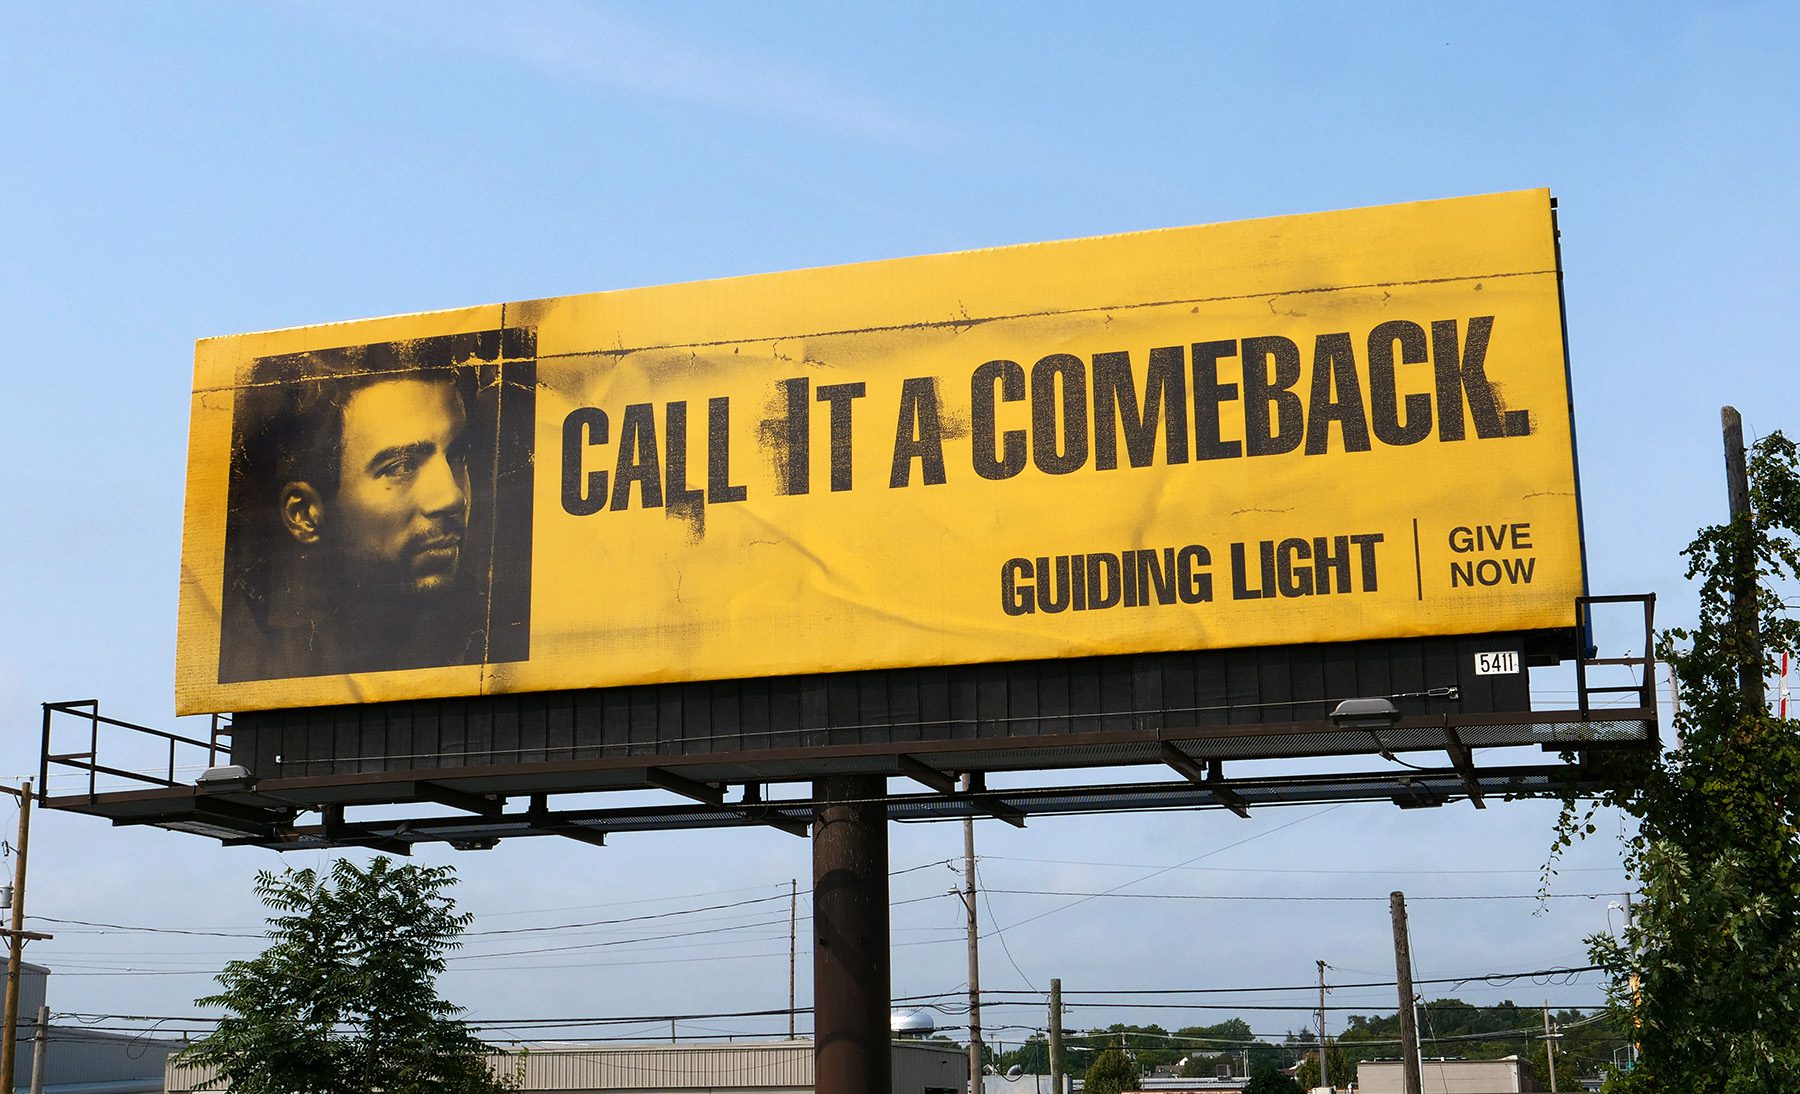 Out of home bulletin for Guiding Light. Call it a comeback.